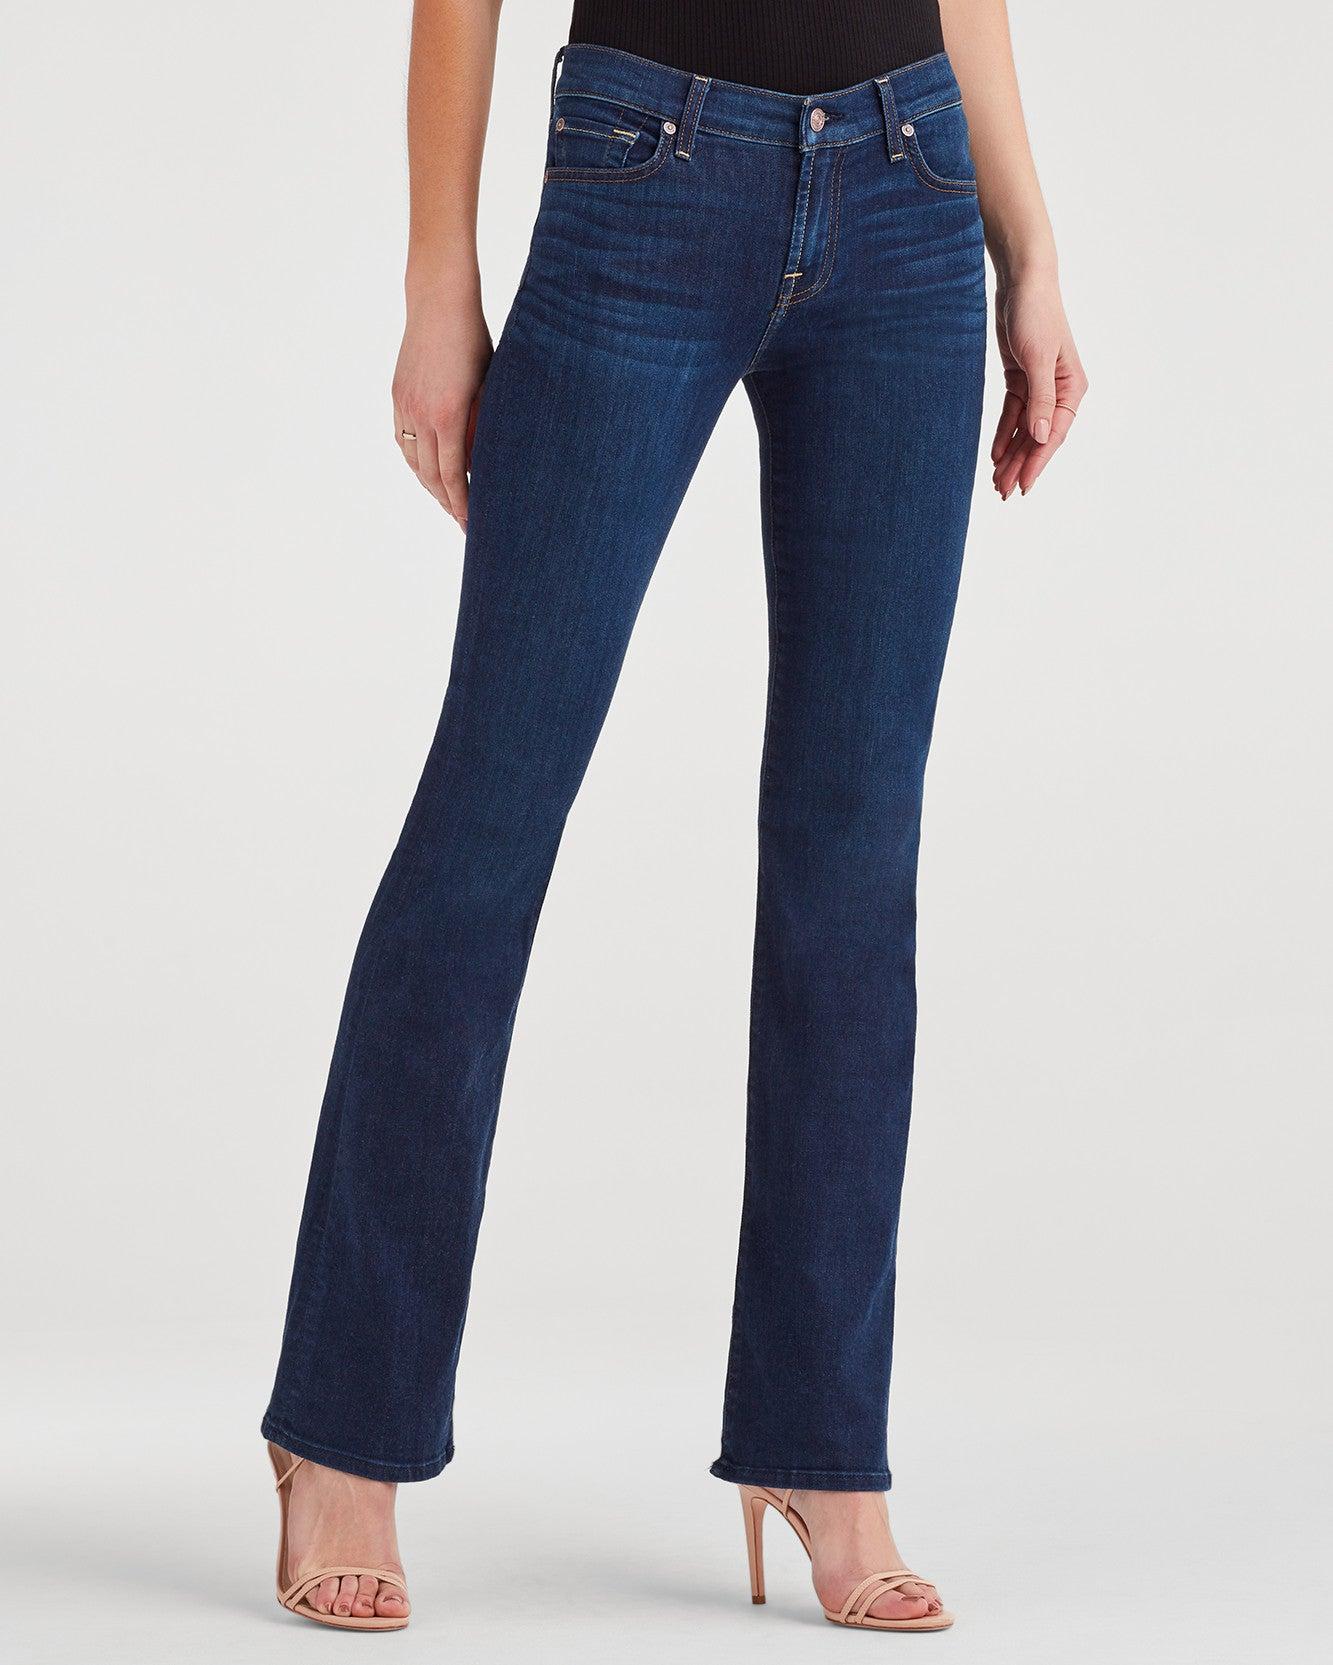 7 For All Mankind Denim Tailorless Bootcut in Blue - Lyst